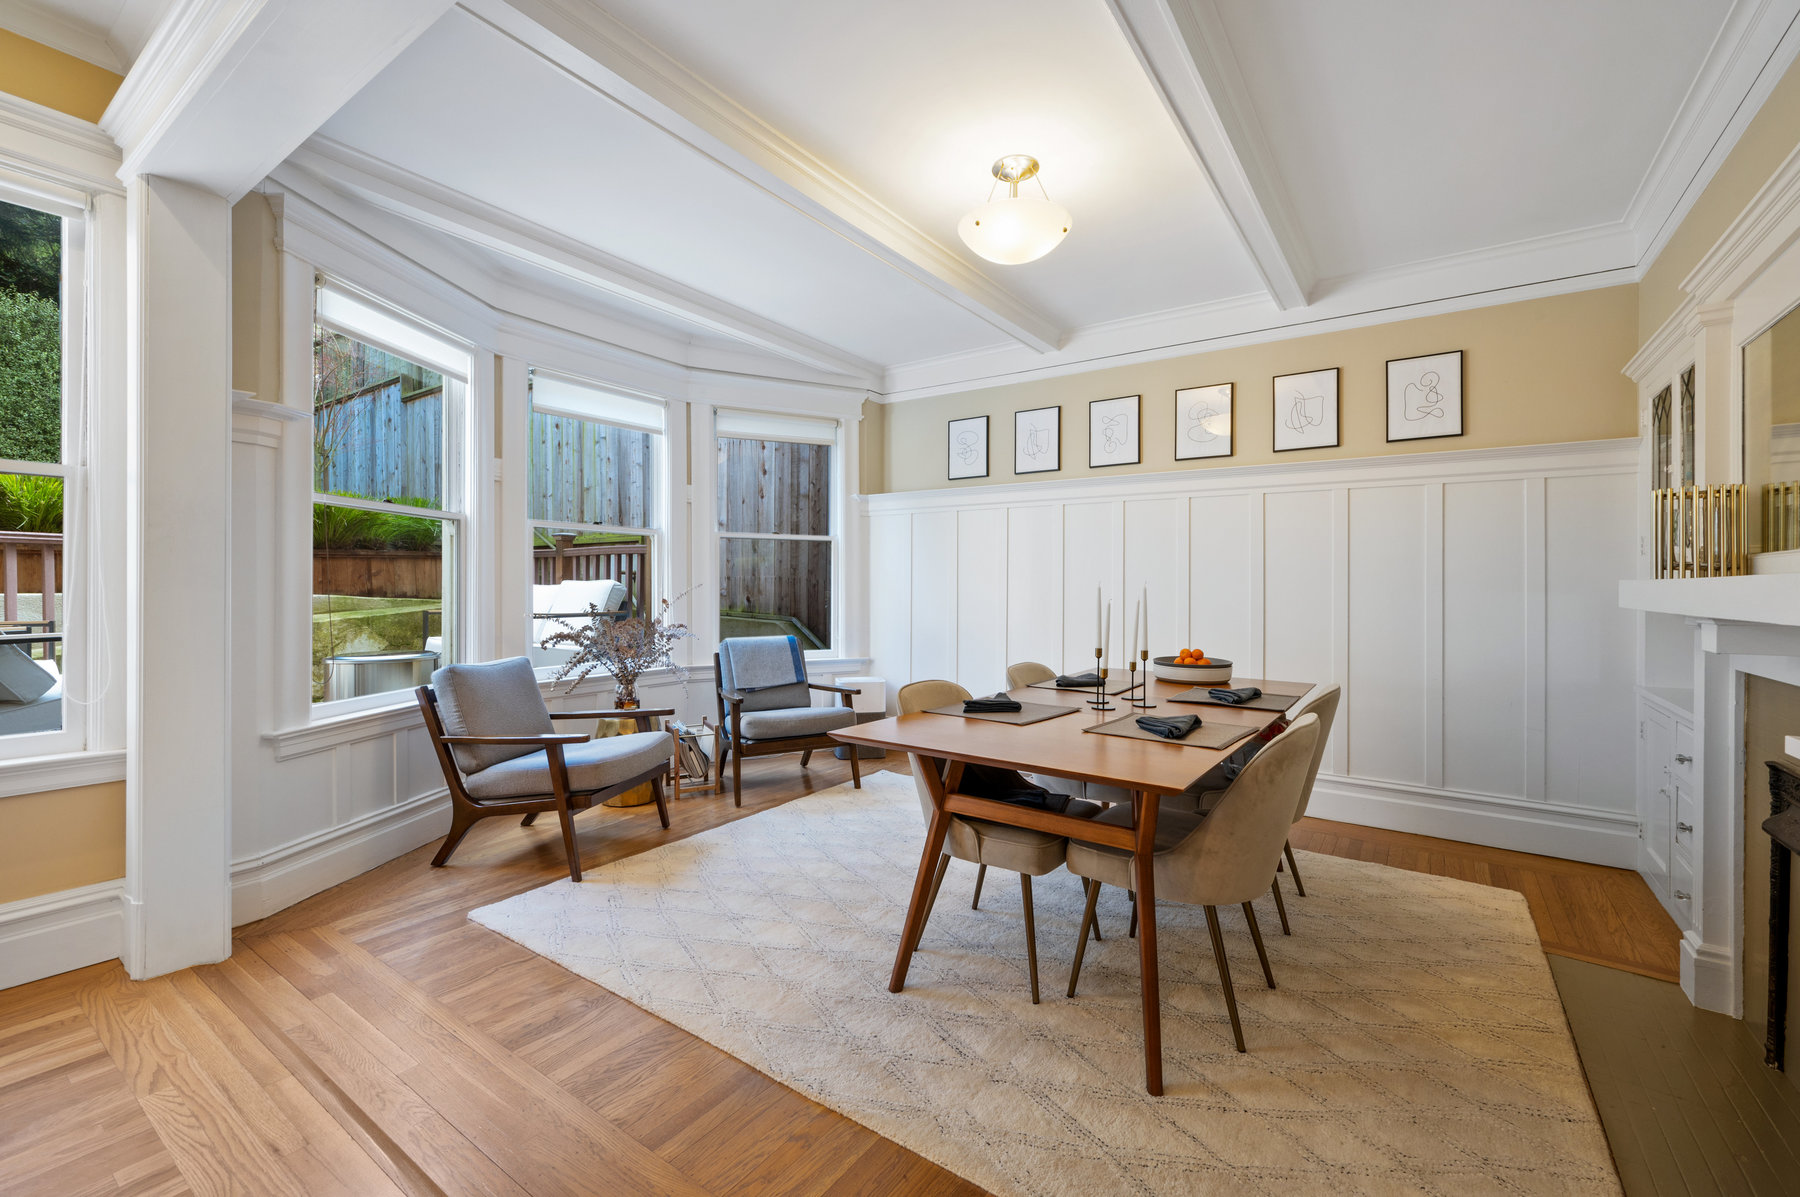 Property Photo: Dining room in lower unit, 638 Belvedere. Beautiful wood detailing, bay windows looking out to backyard. 